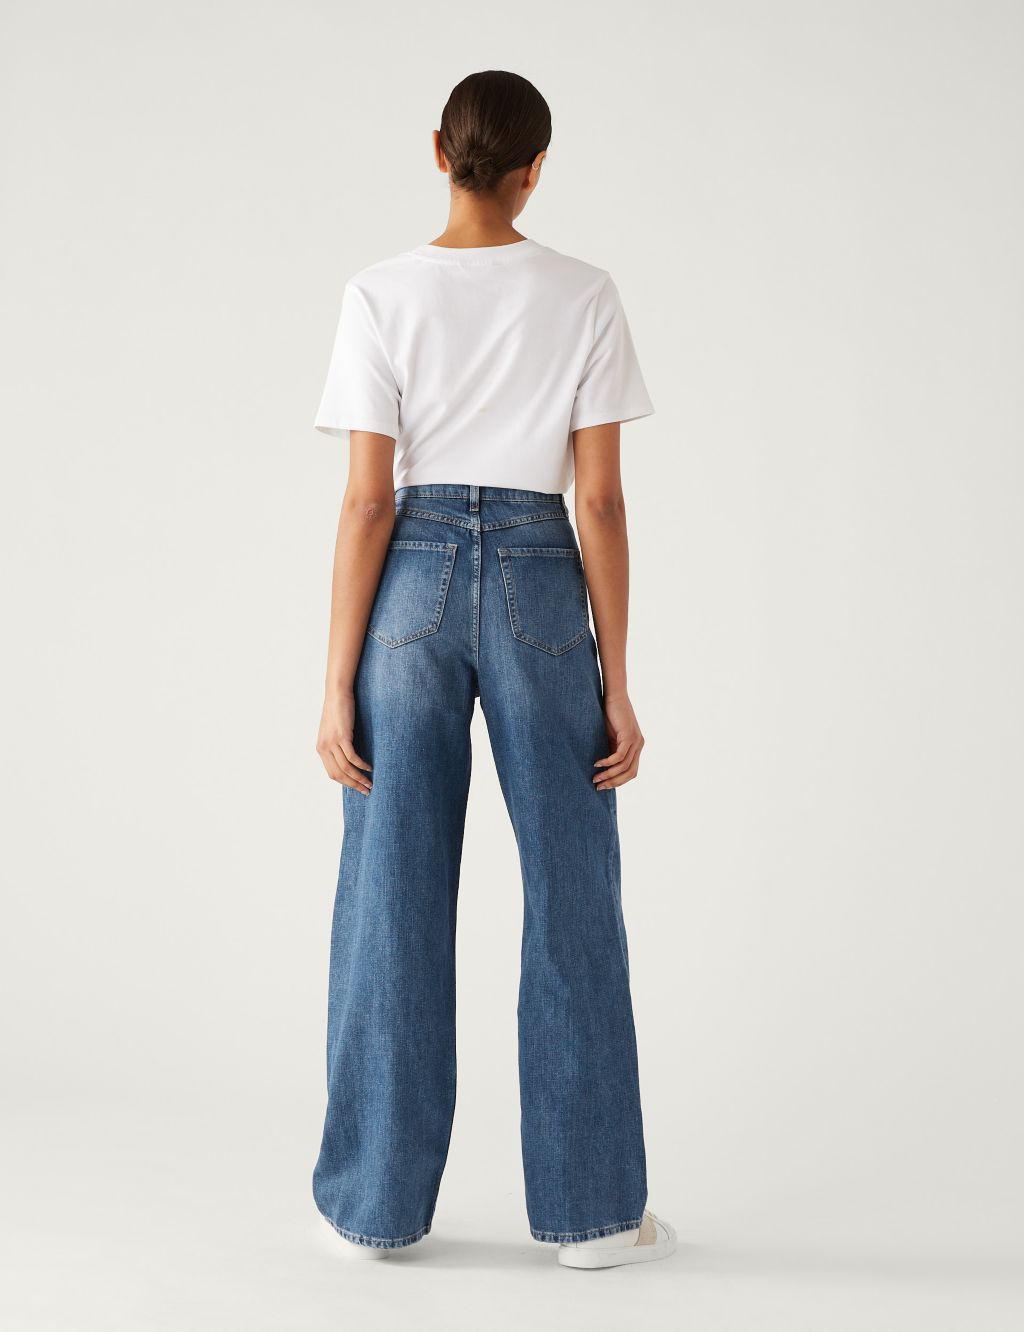 High Waisted Wide Leg Jeans image 4